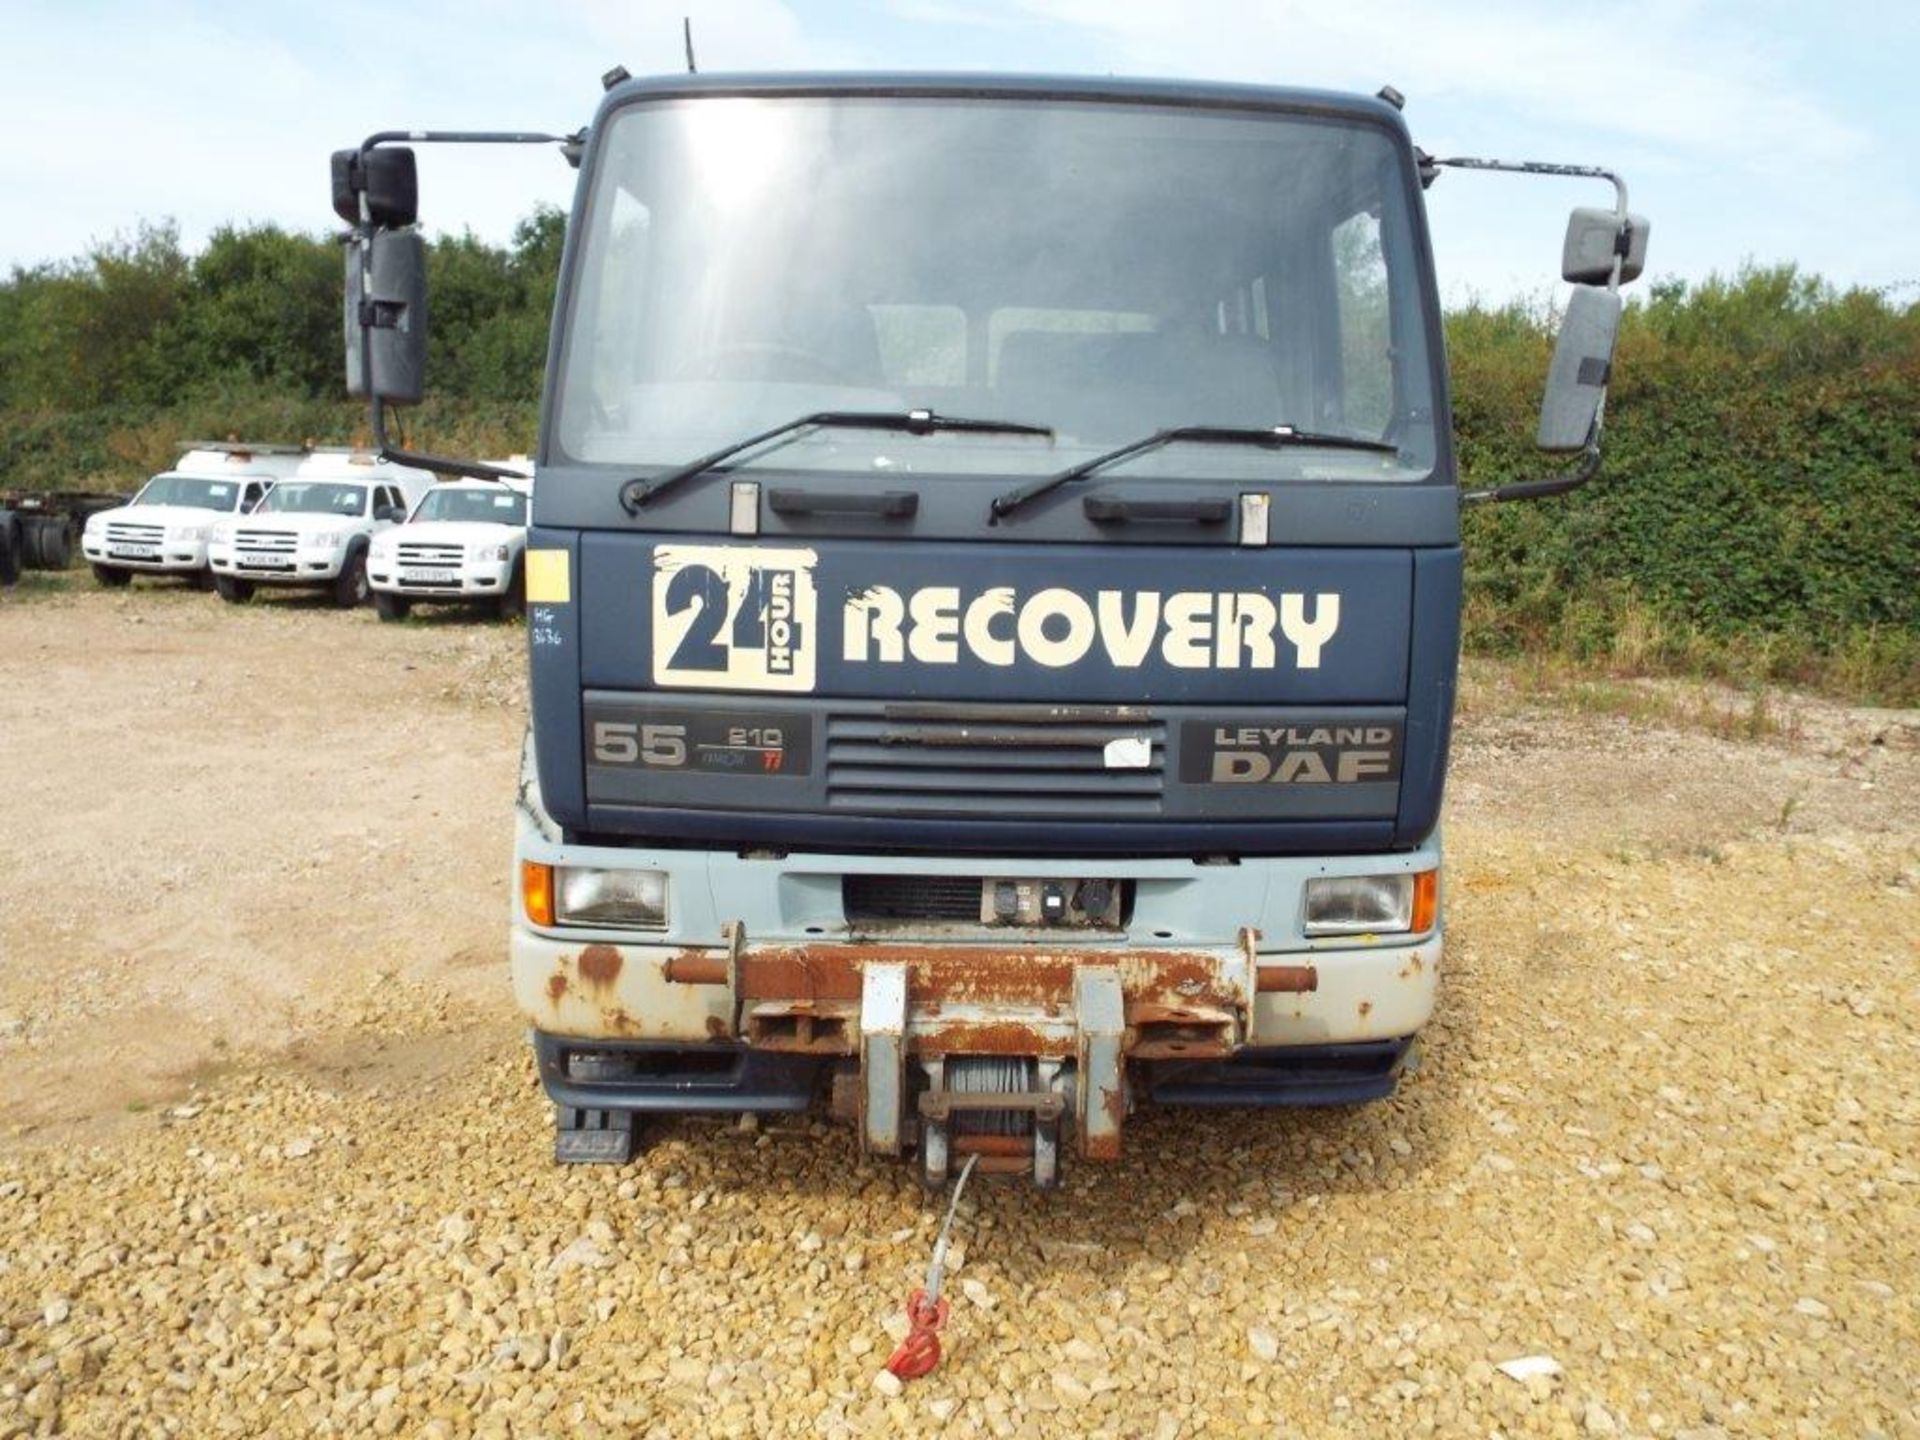 Leyland DAF 55 210 Crew Cab 18T Tilt and Slide Recovery Vehicle with Underlift and 2 x Winches - Image 2 of 32